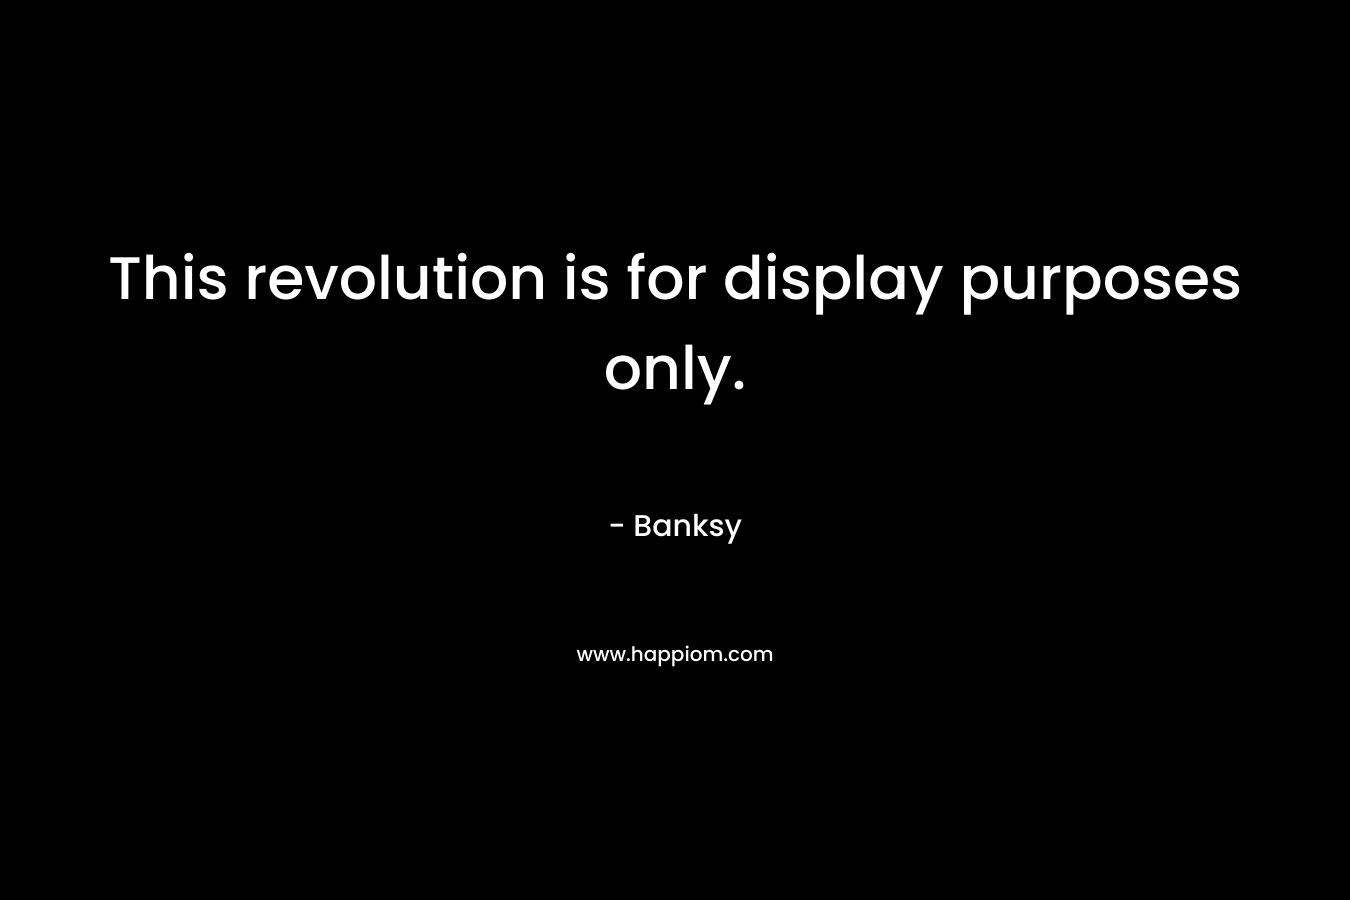 This revolution is for display purposes only. – Banksy